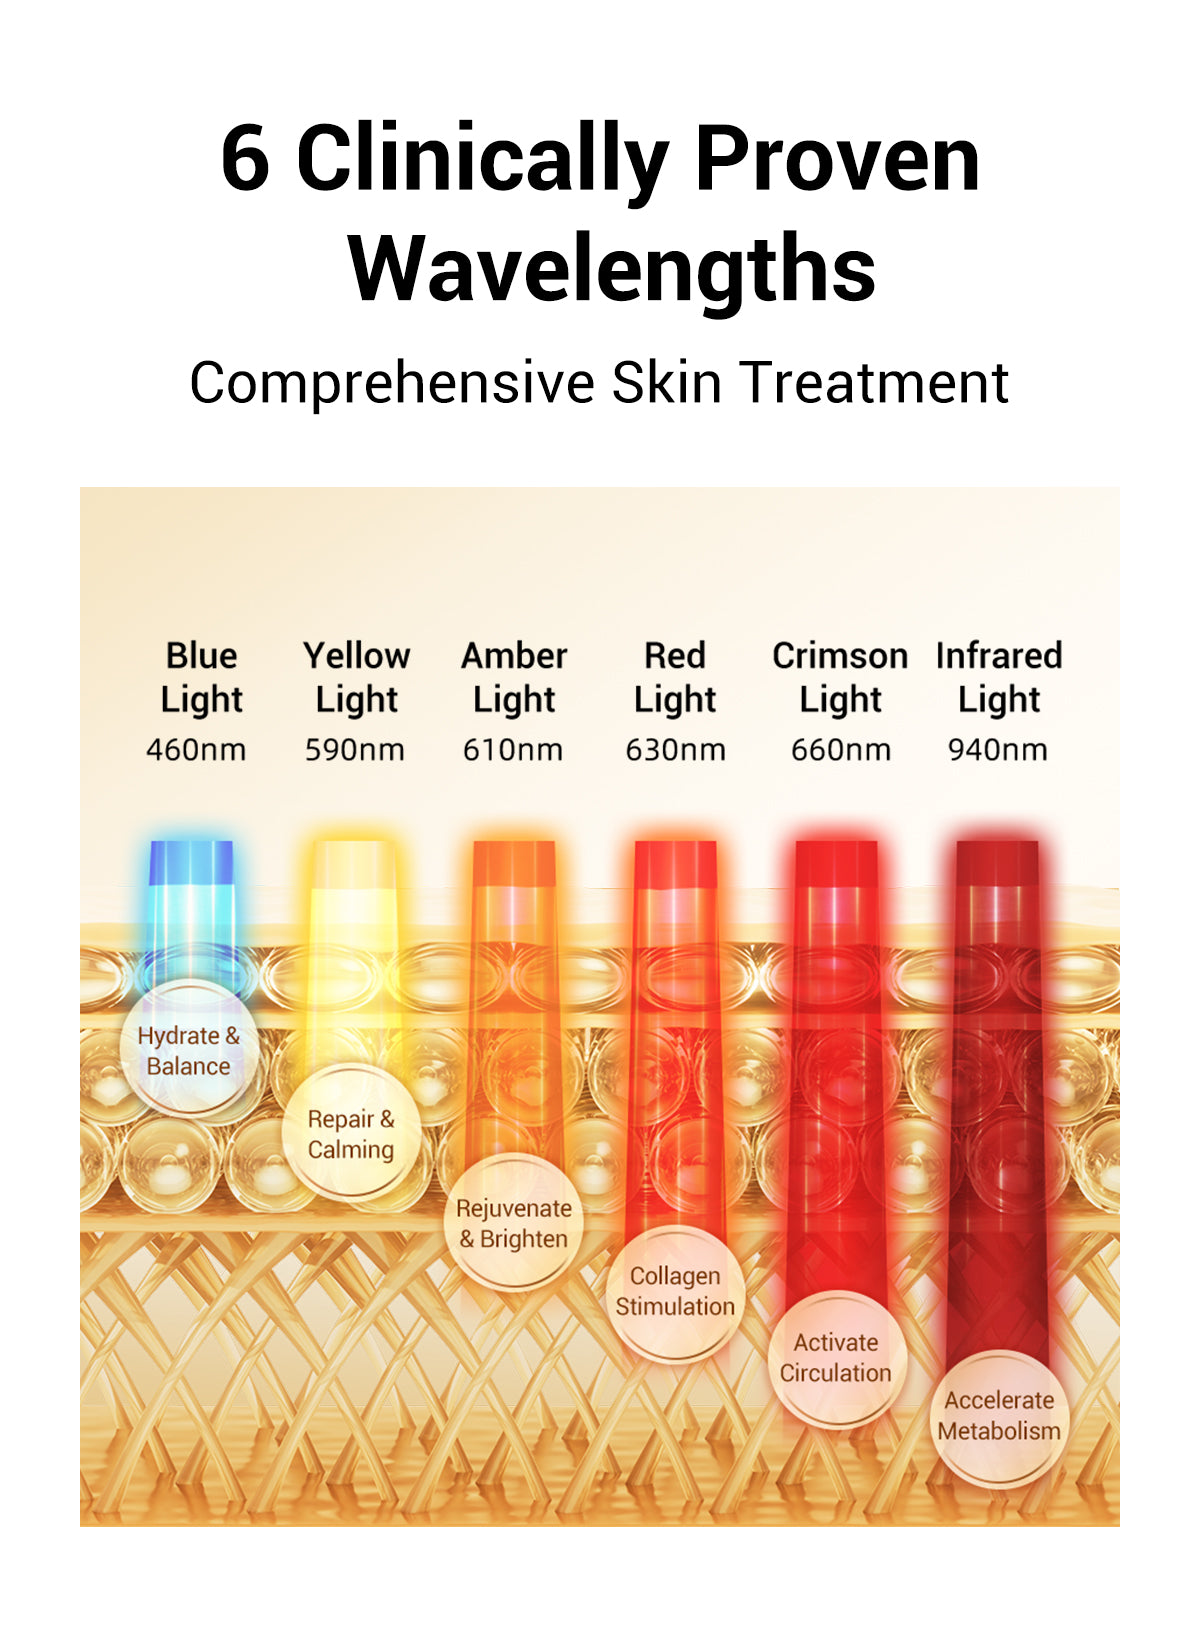 Clinically proven LED light therapy with six wavelengths for hydrating, calming, rejuvenating, brightening, and enhancing skin's collagen production and metabolism.